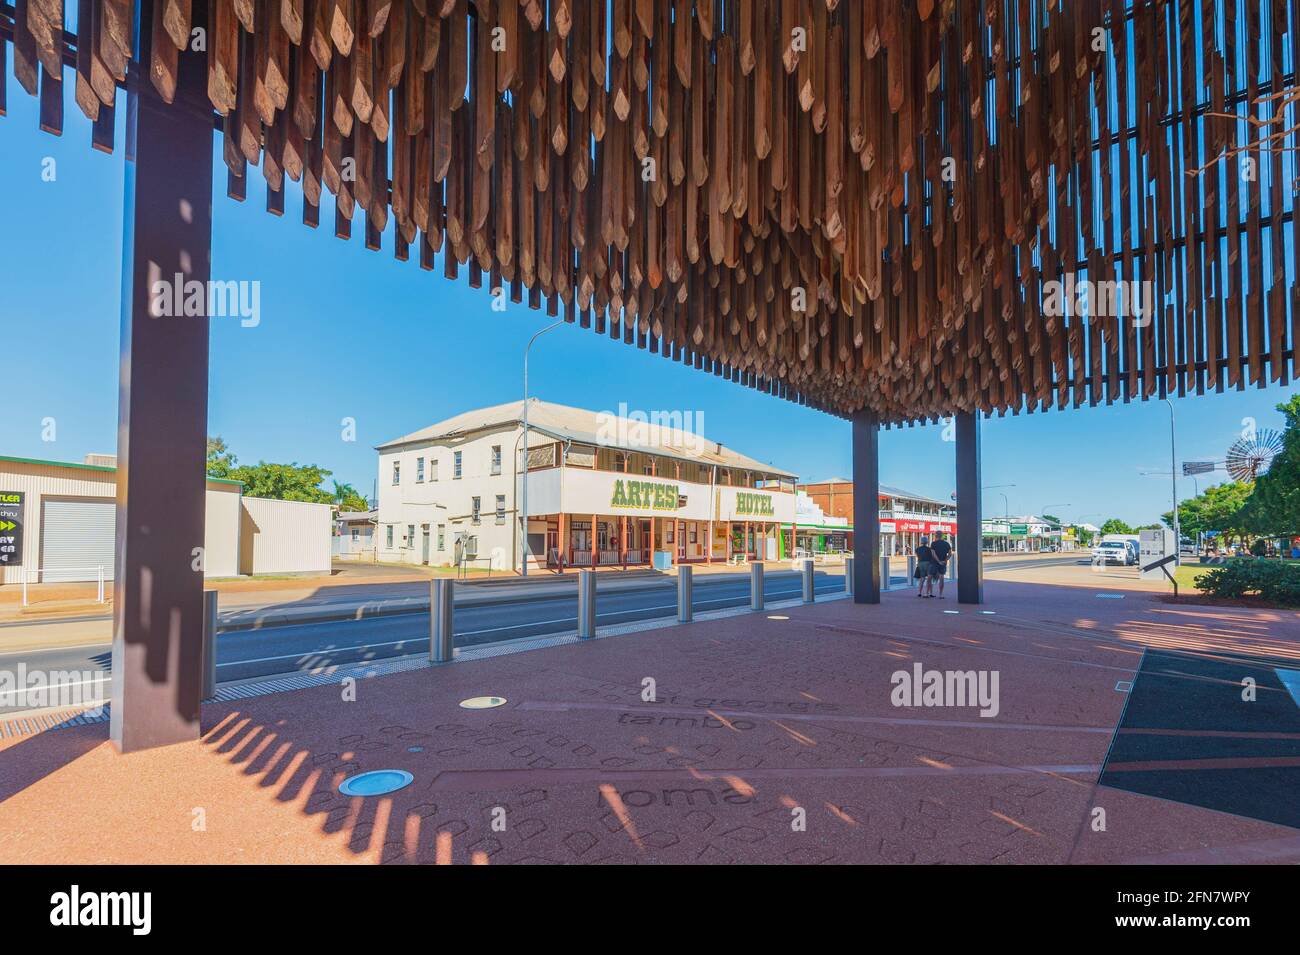 Memorial of the Tree of Knowledge with the Artesian Hotel in the background, Barcaldine, Queensland, QLD, Australia Stock Photo